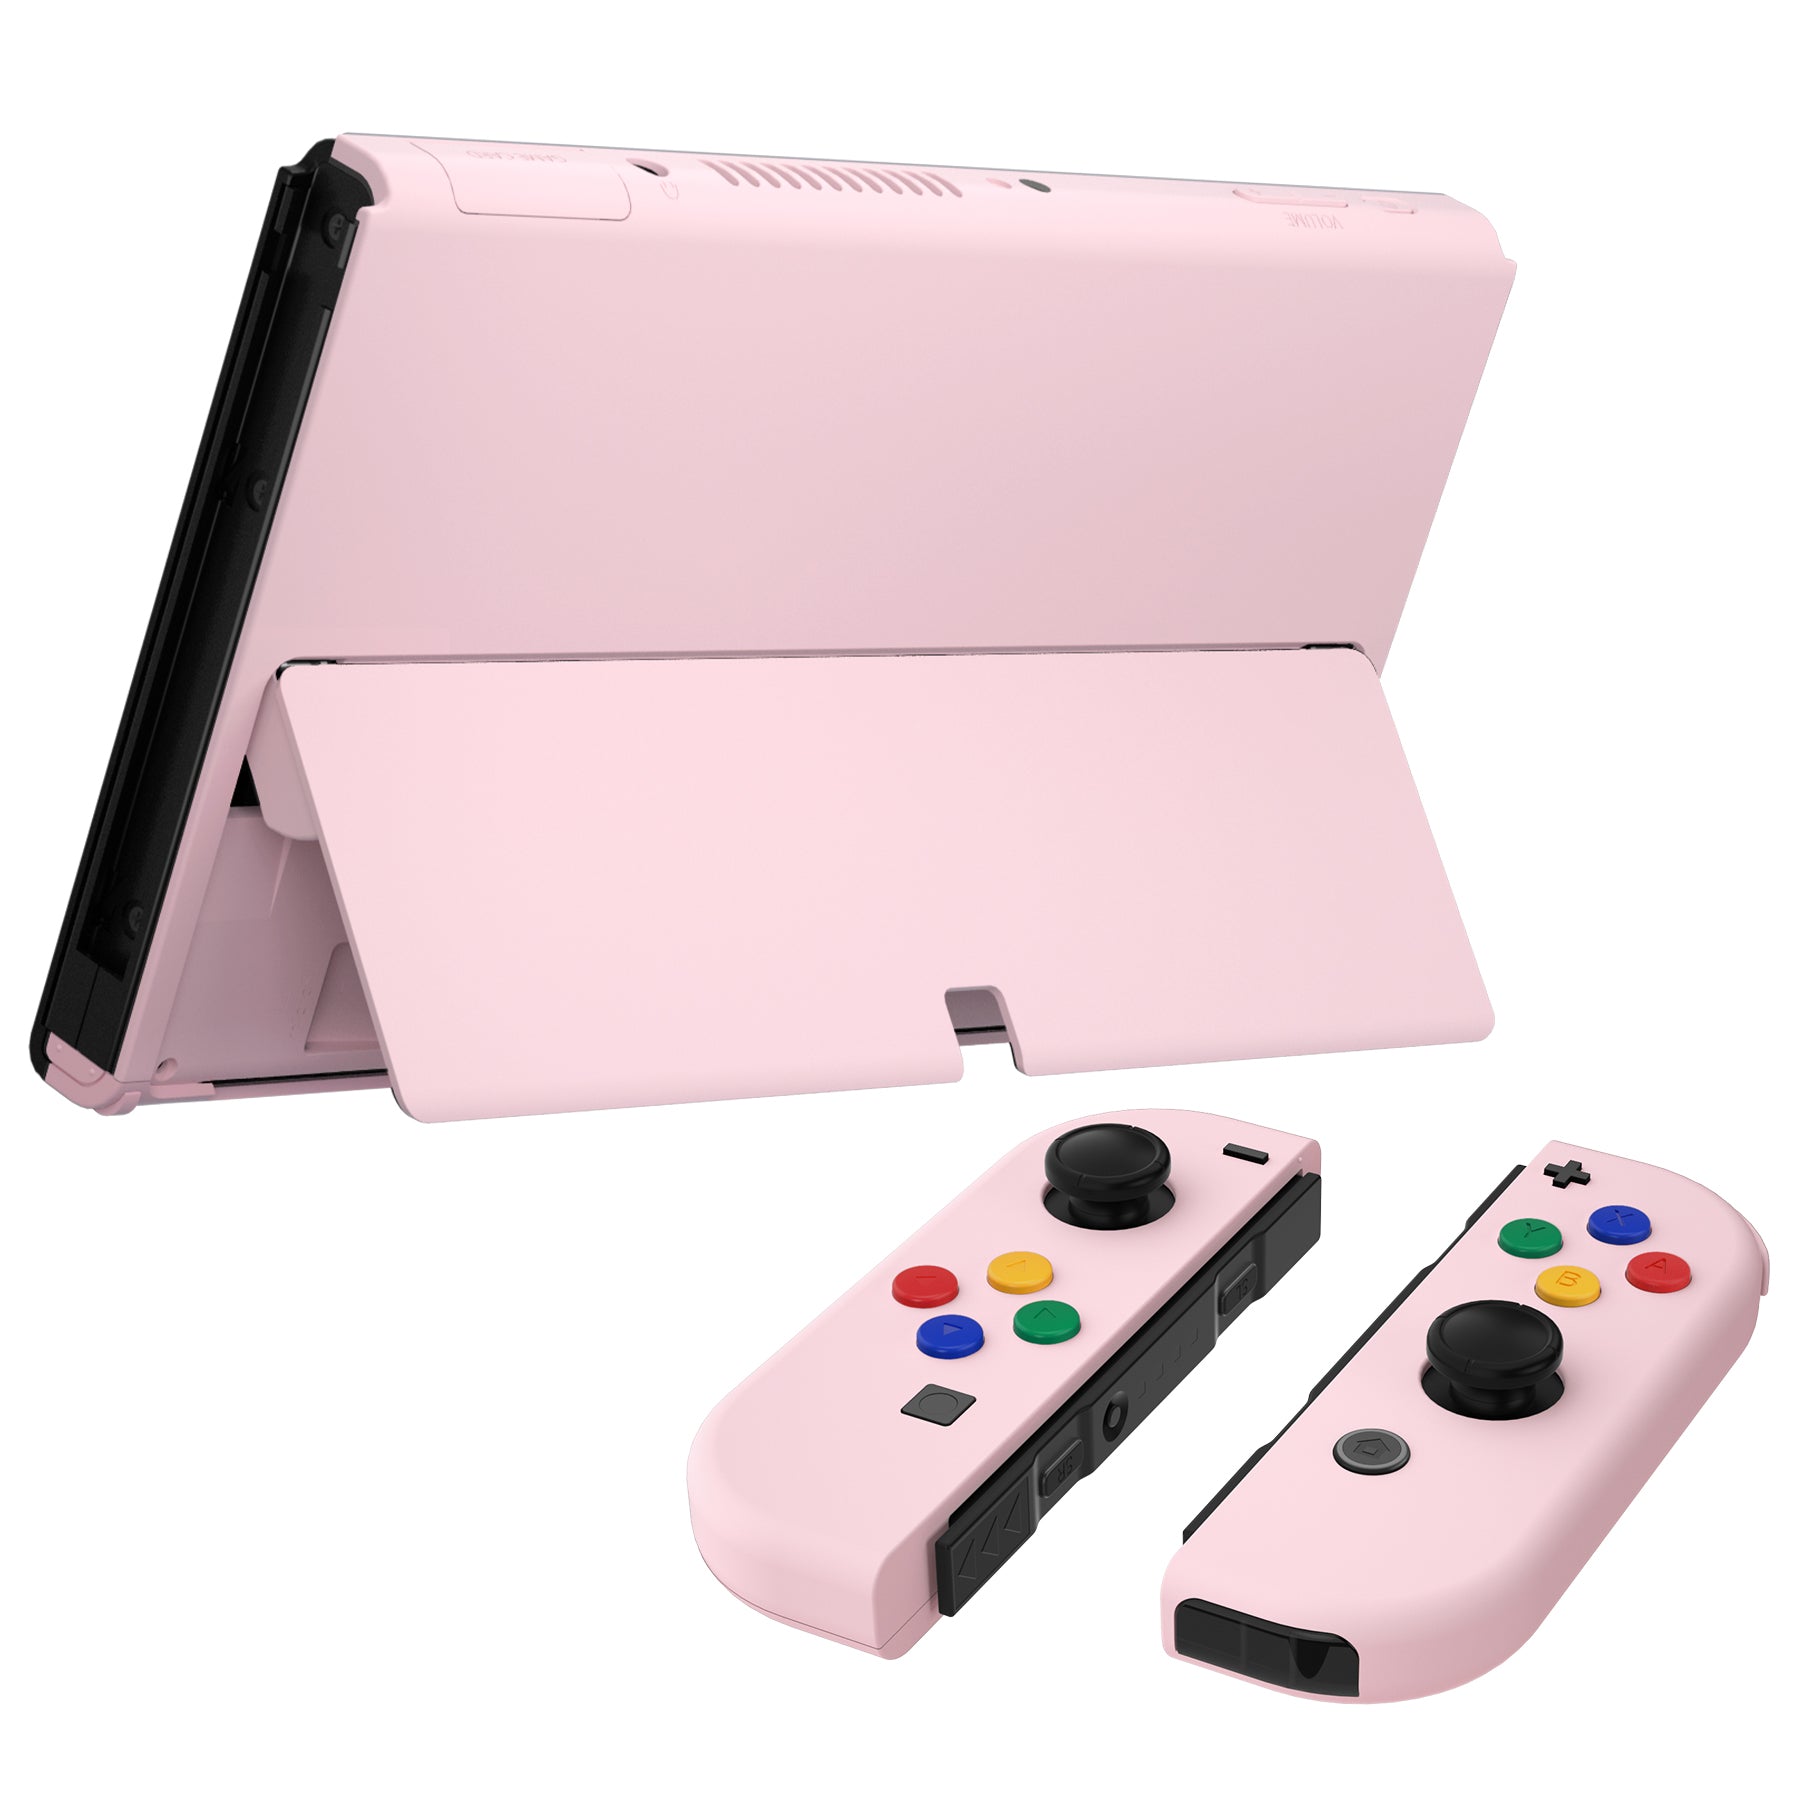 Yappe Store - Pre-order Nintendo Switch – OLED Model now available